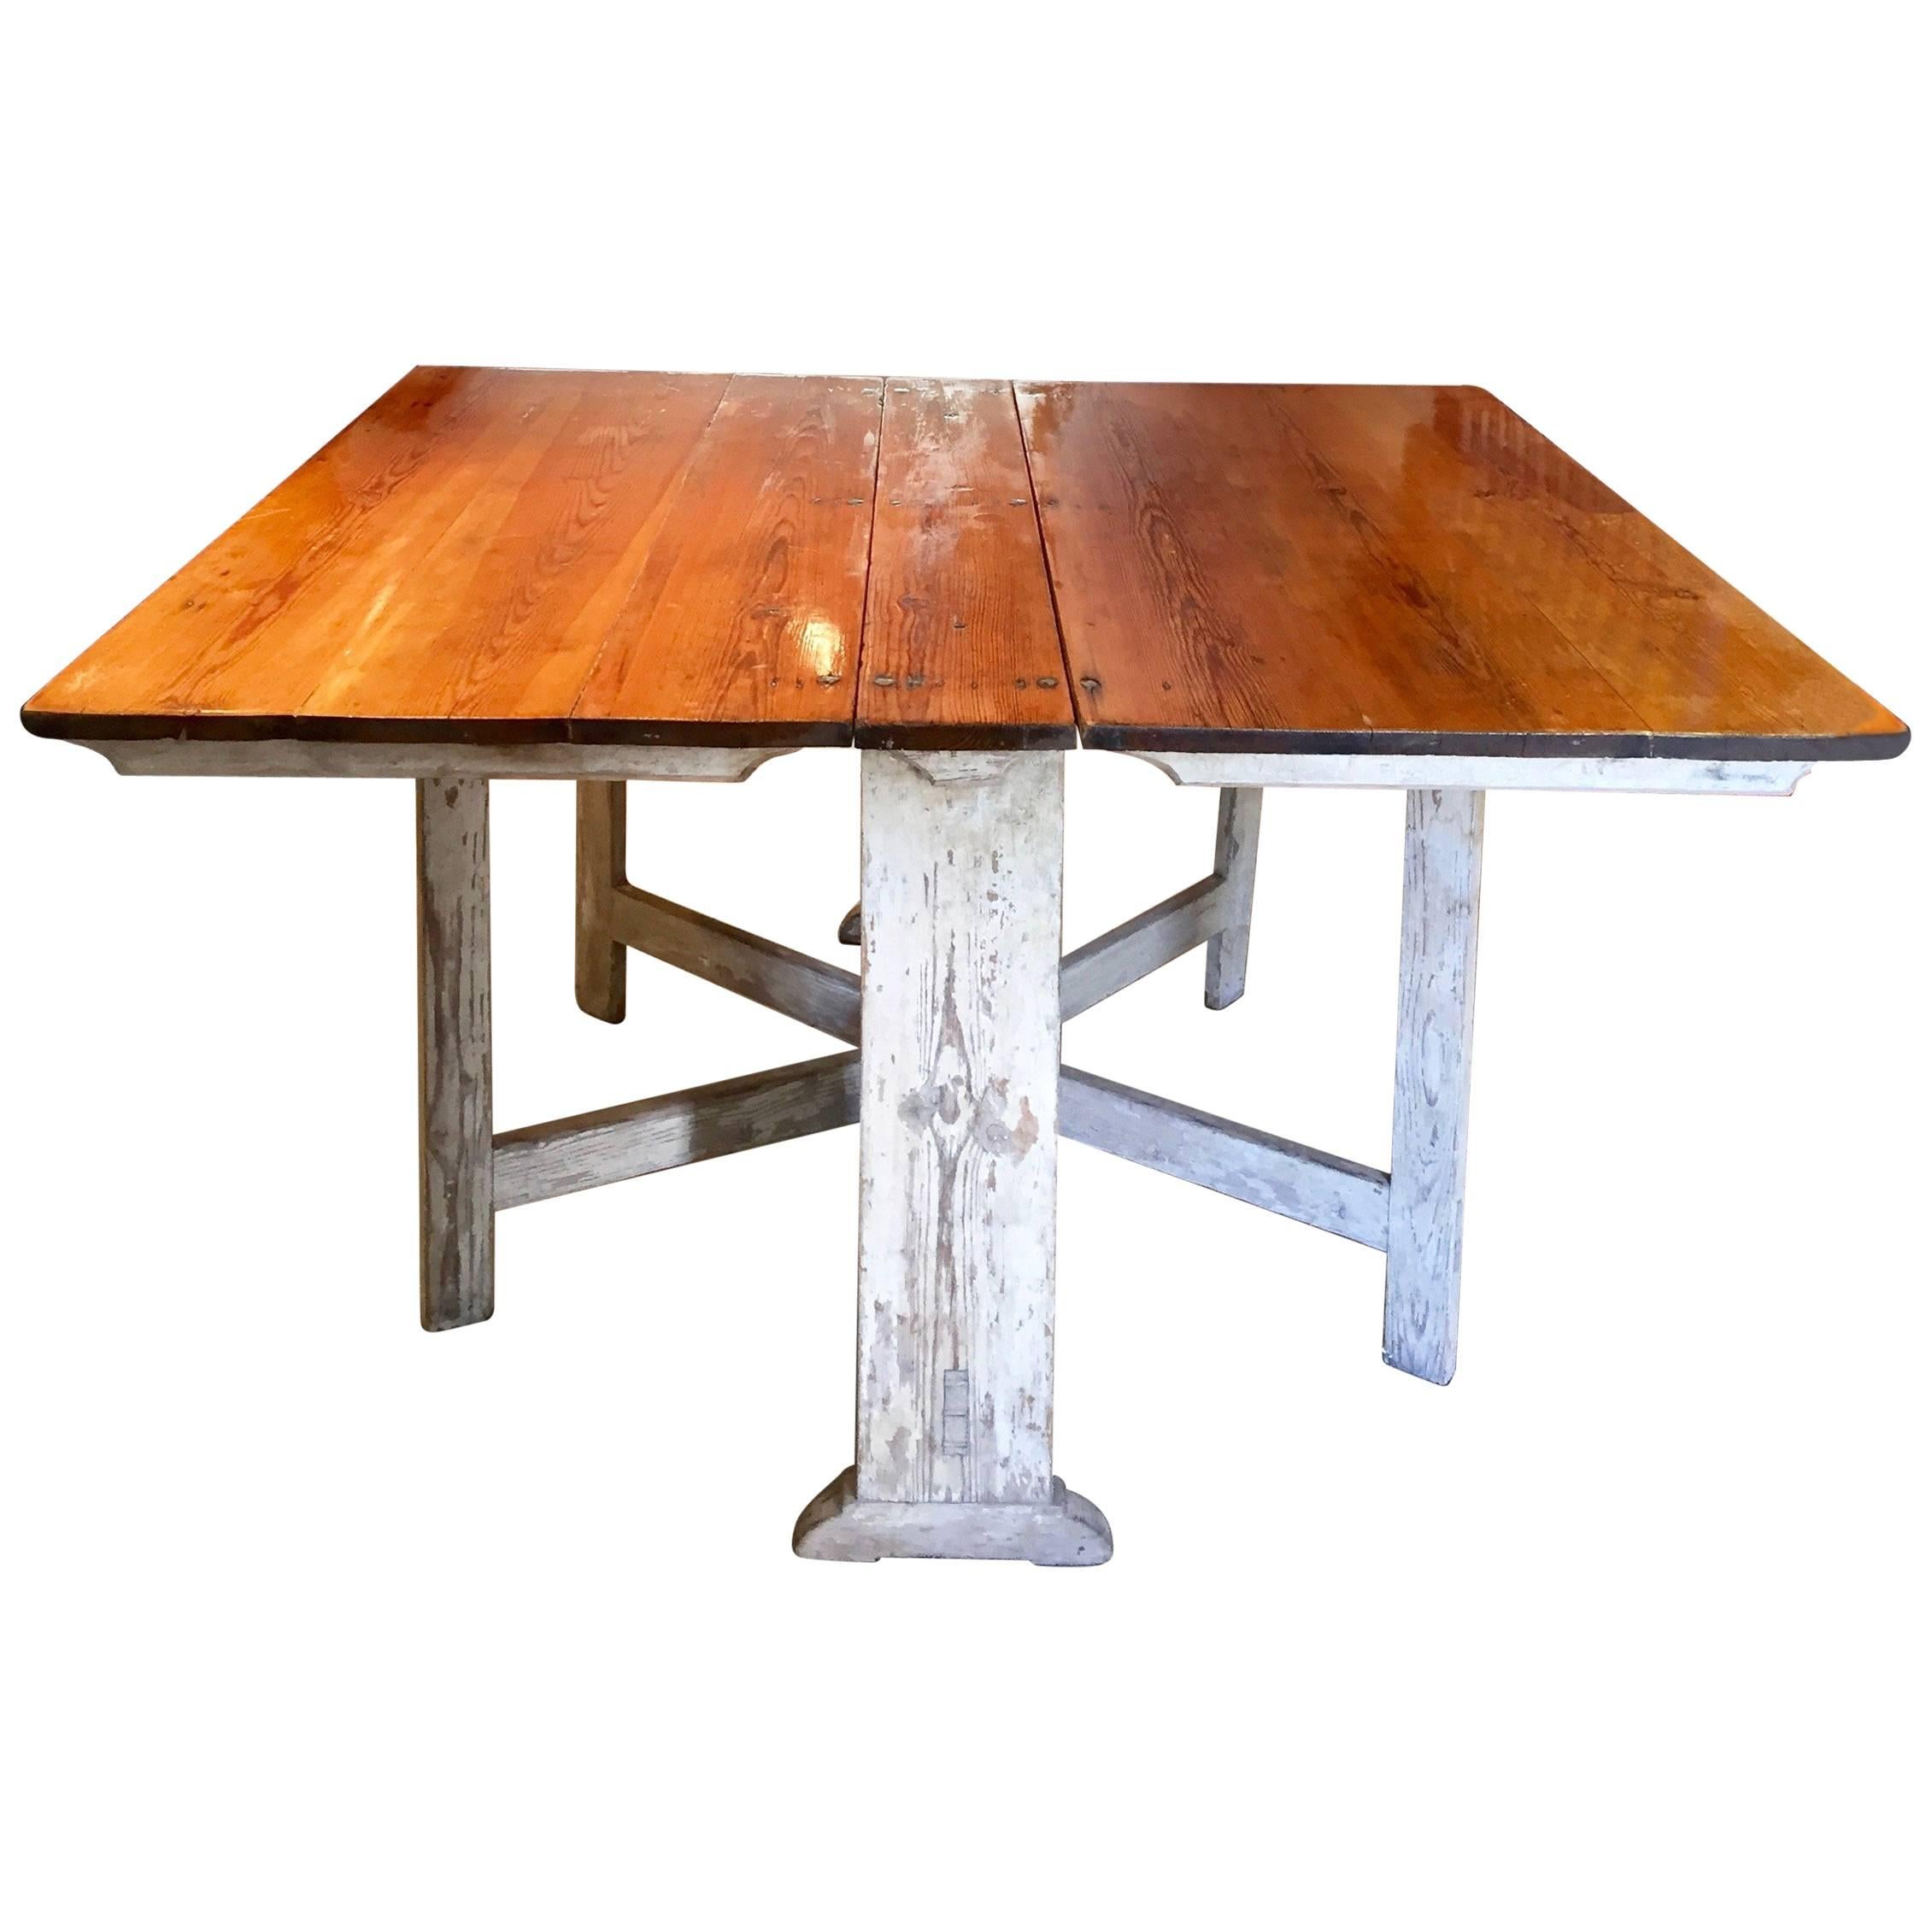 Swedish 18th Century Gustavian Slag Board Table with Original Paint to Base For Sale